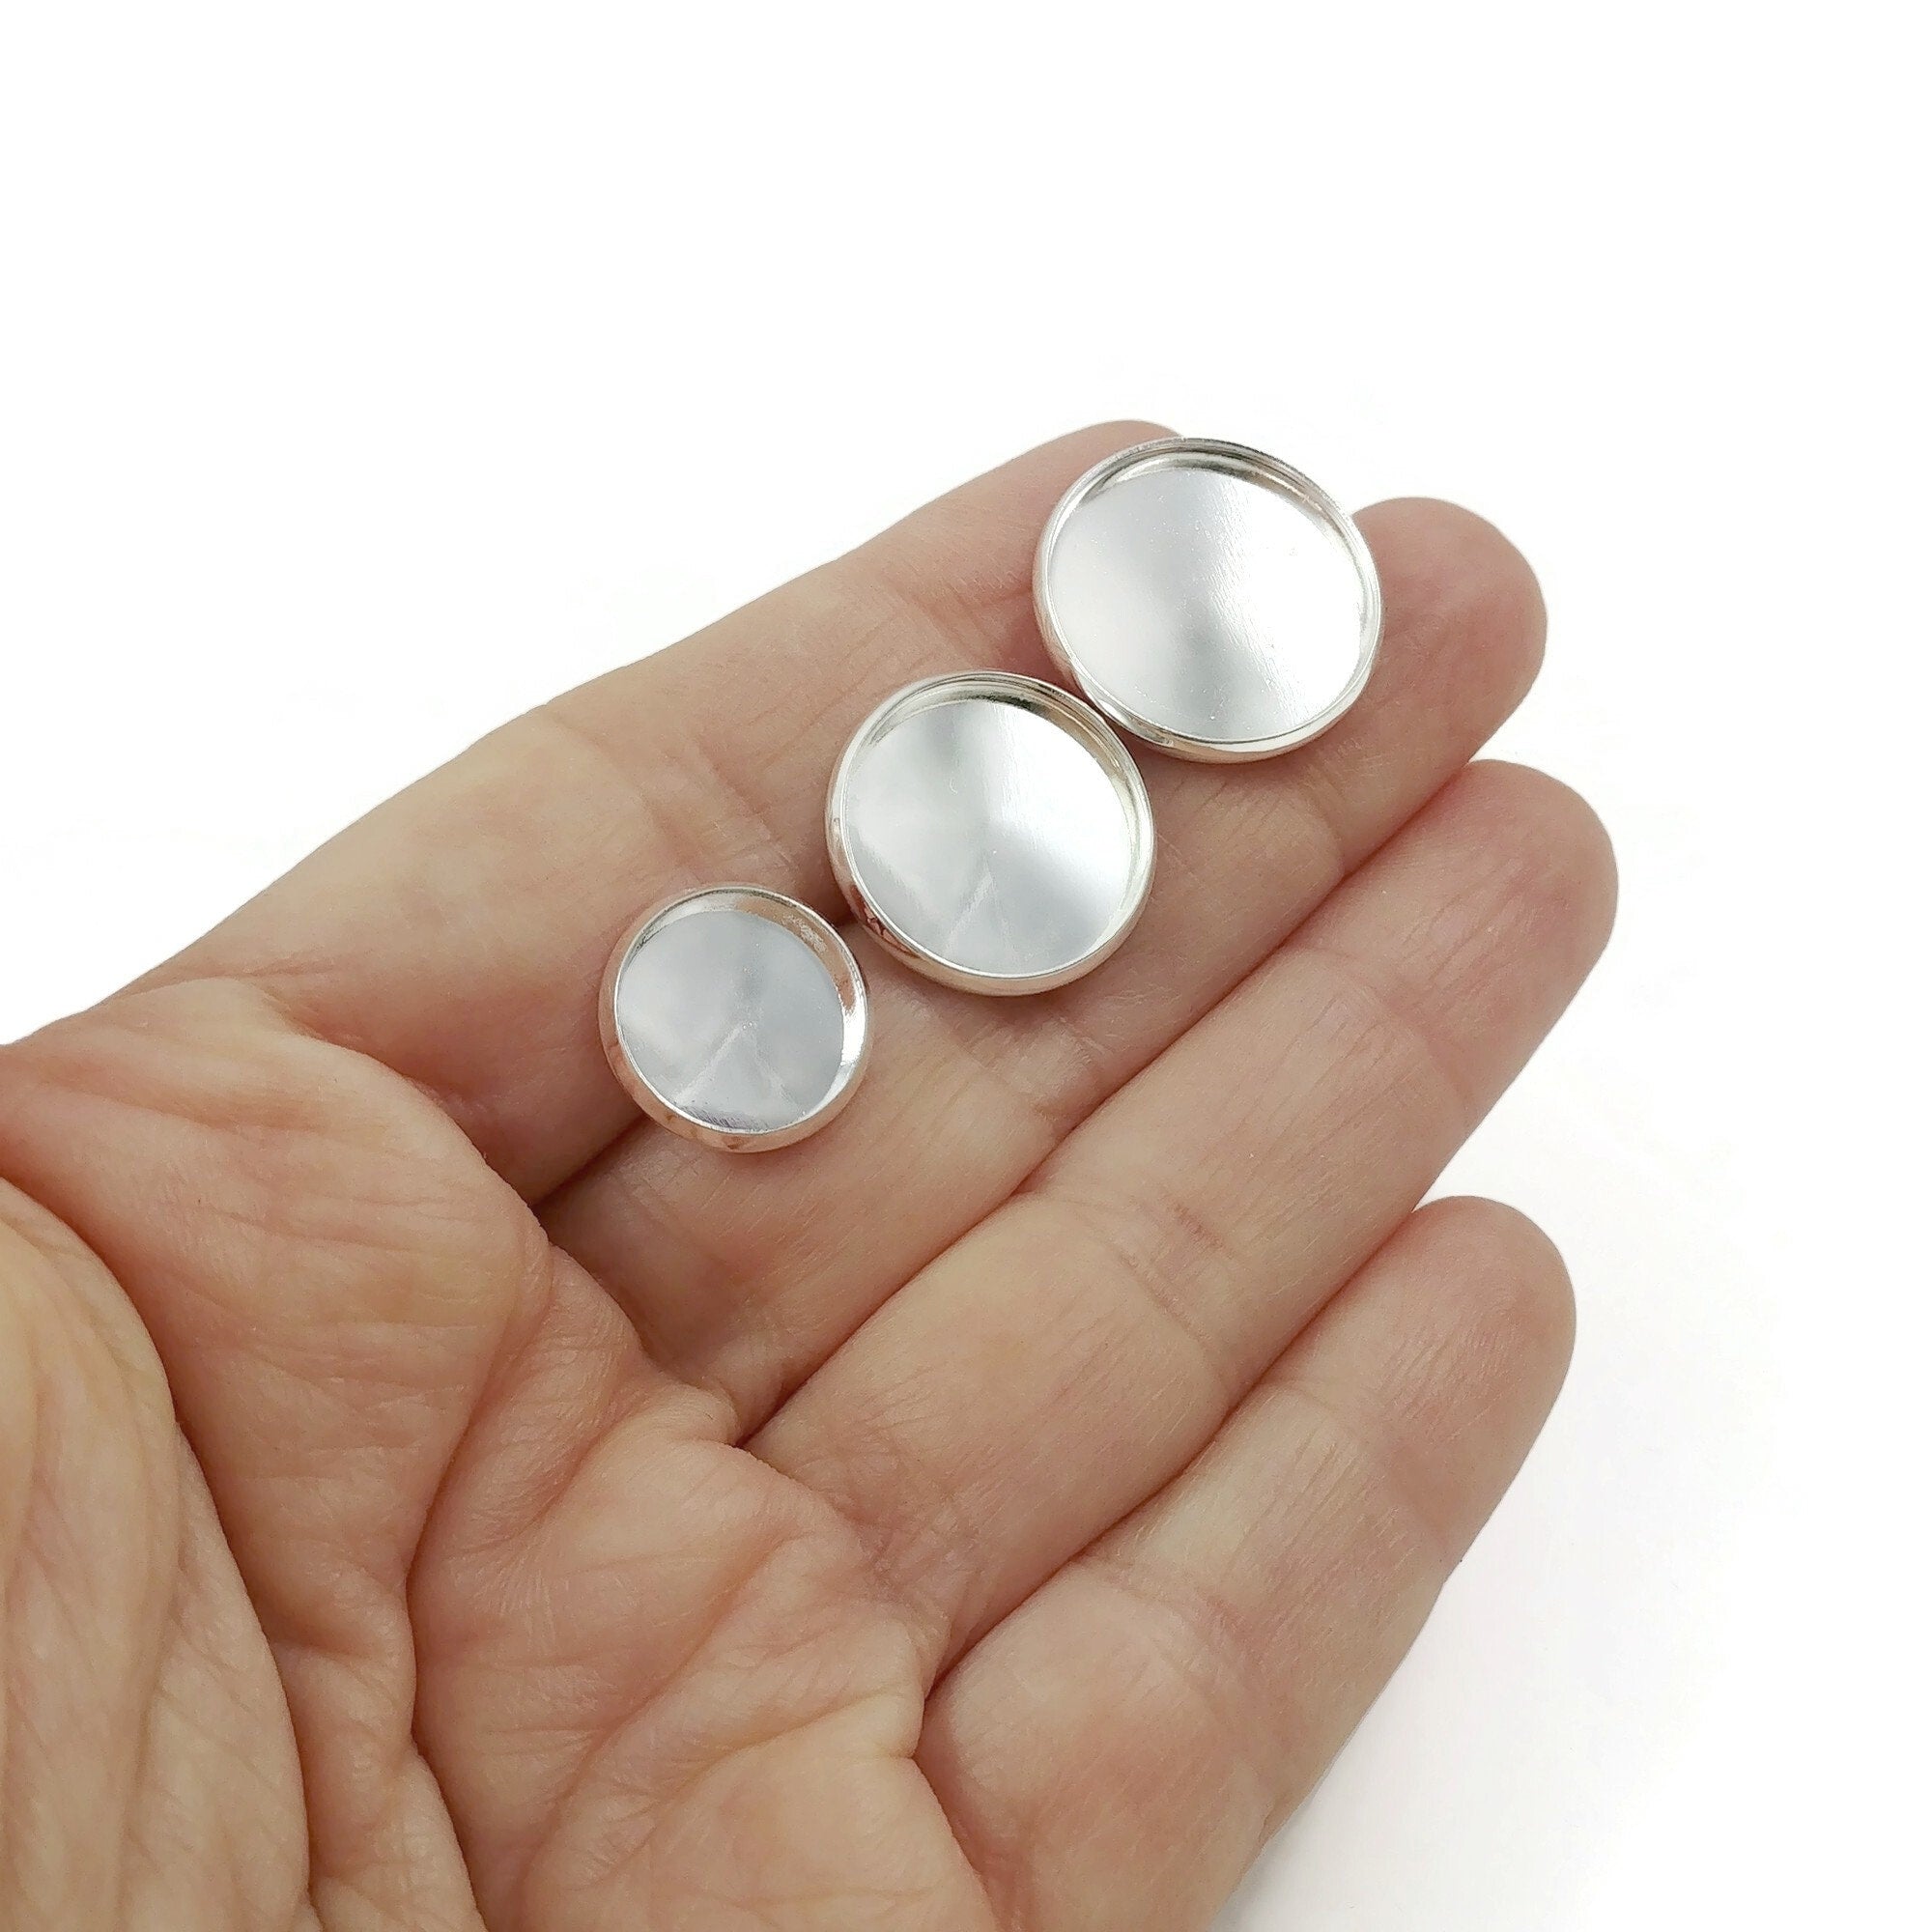 Silver shank button settings - Make you own buttons - Cabochon bezel